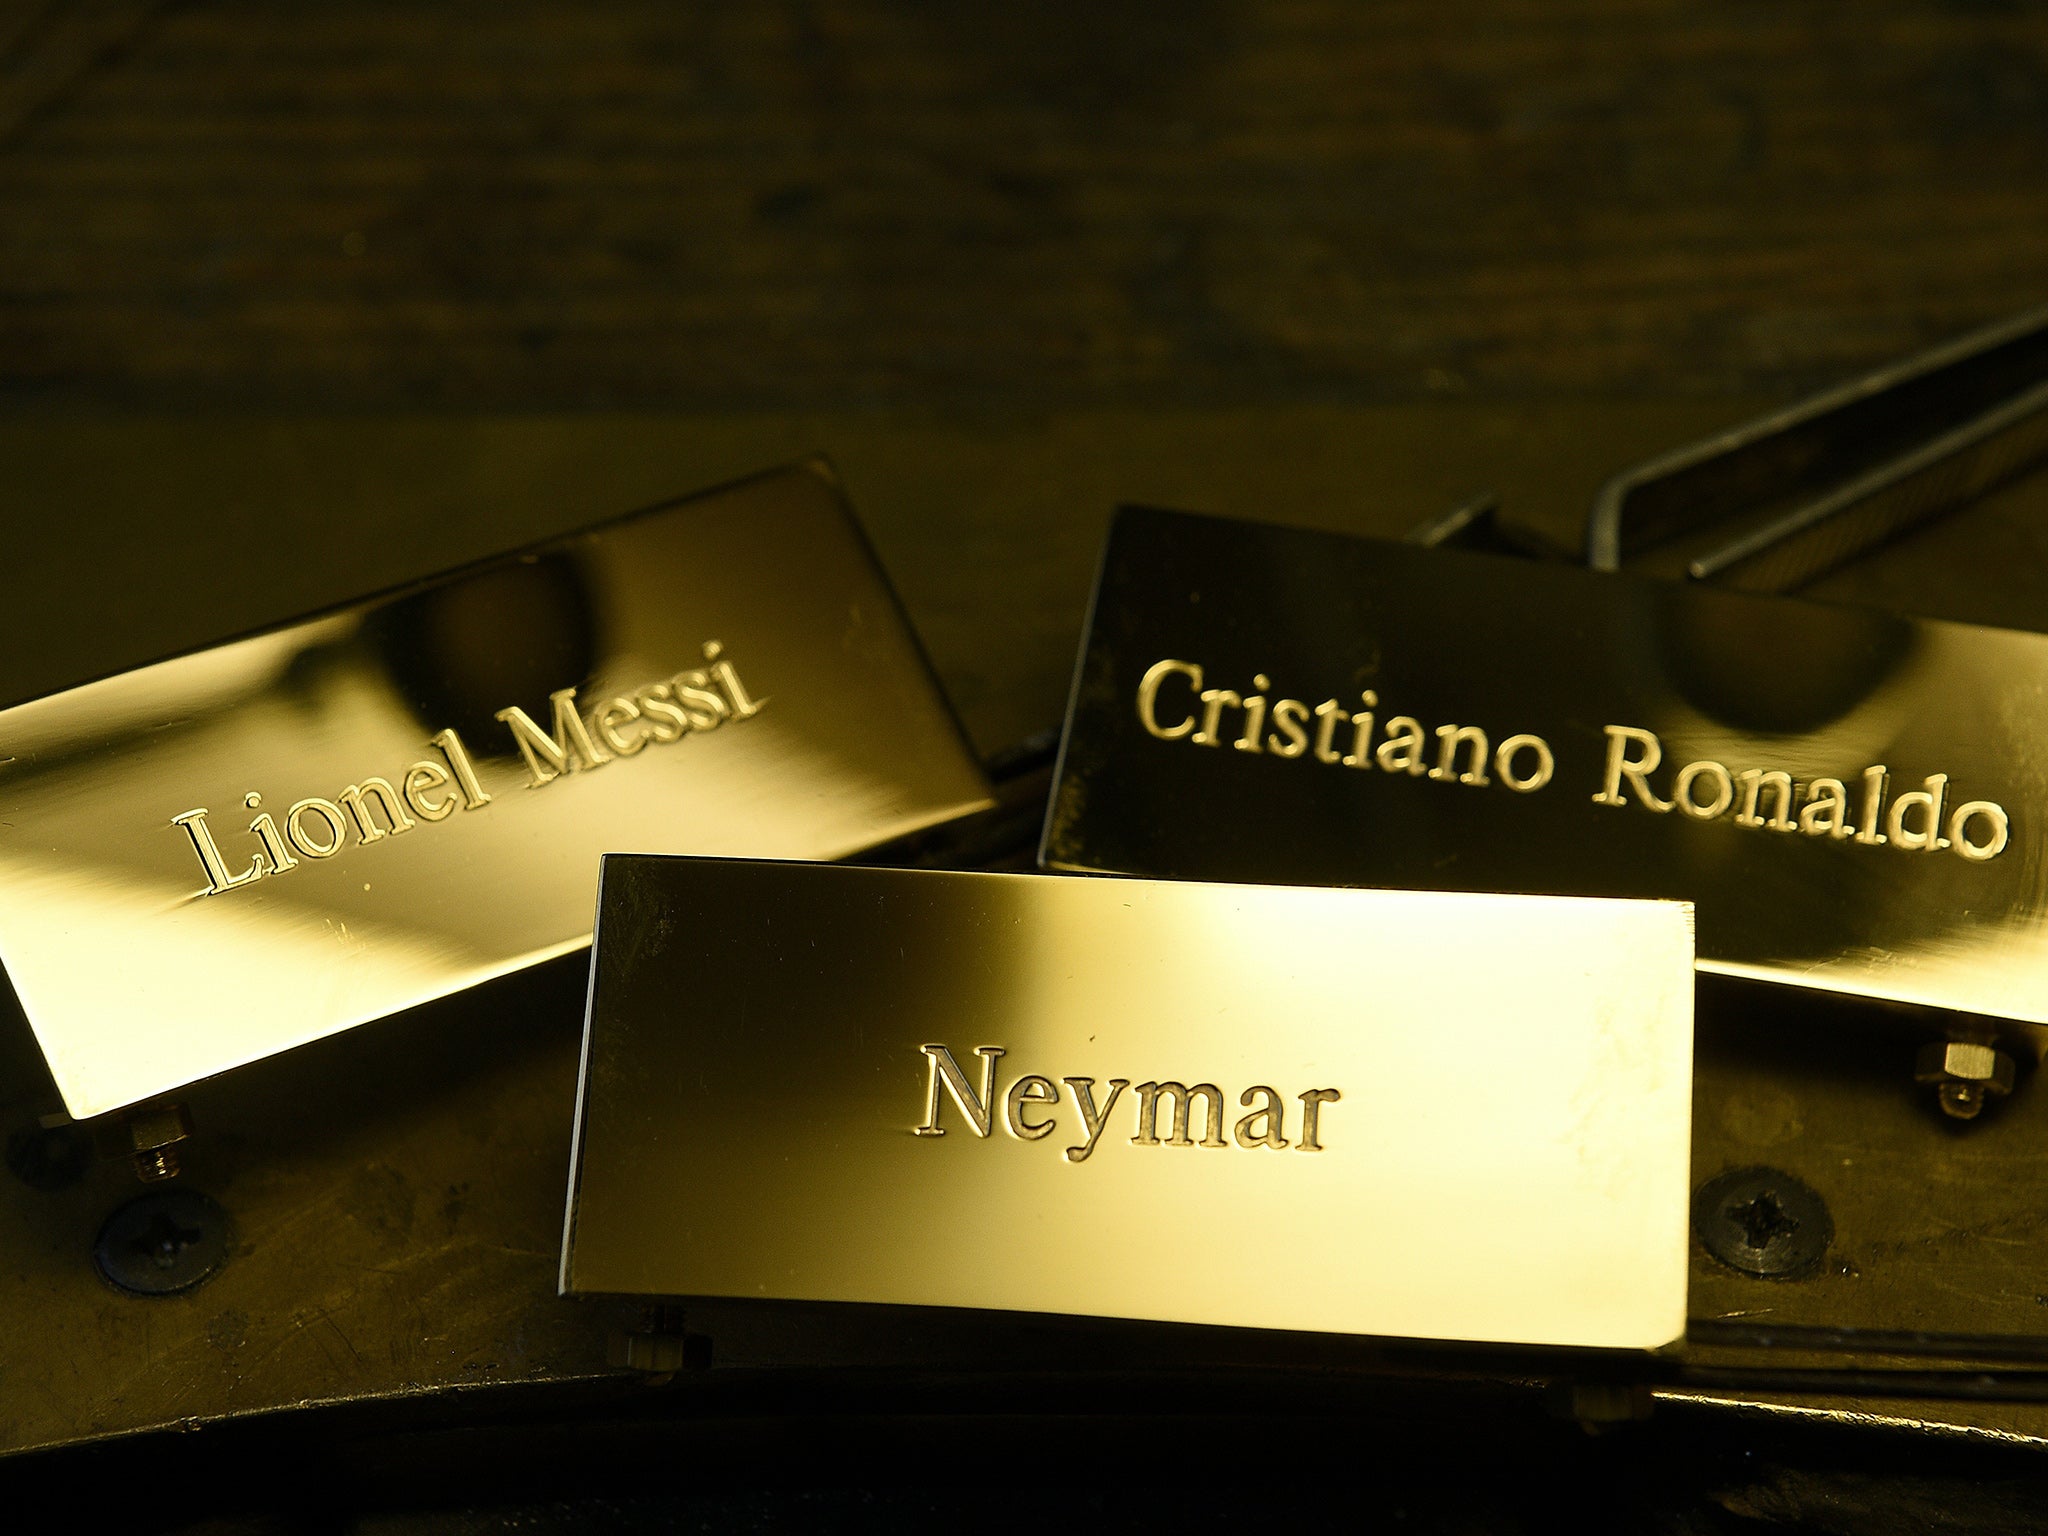 Messi, Neymar or Ronaldo? Who's name will be on the prize?